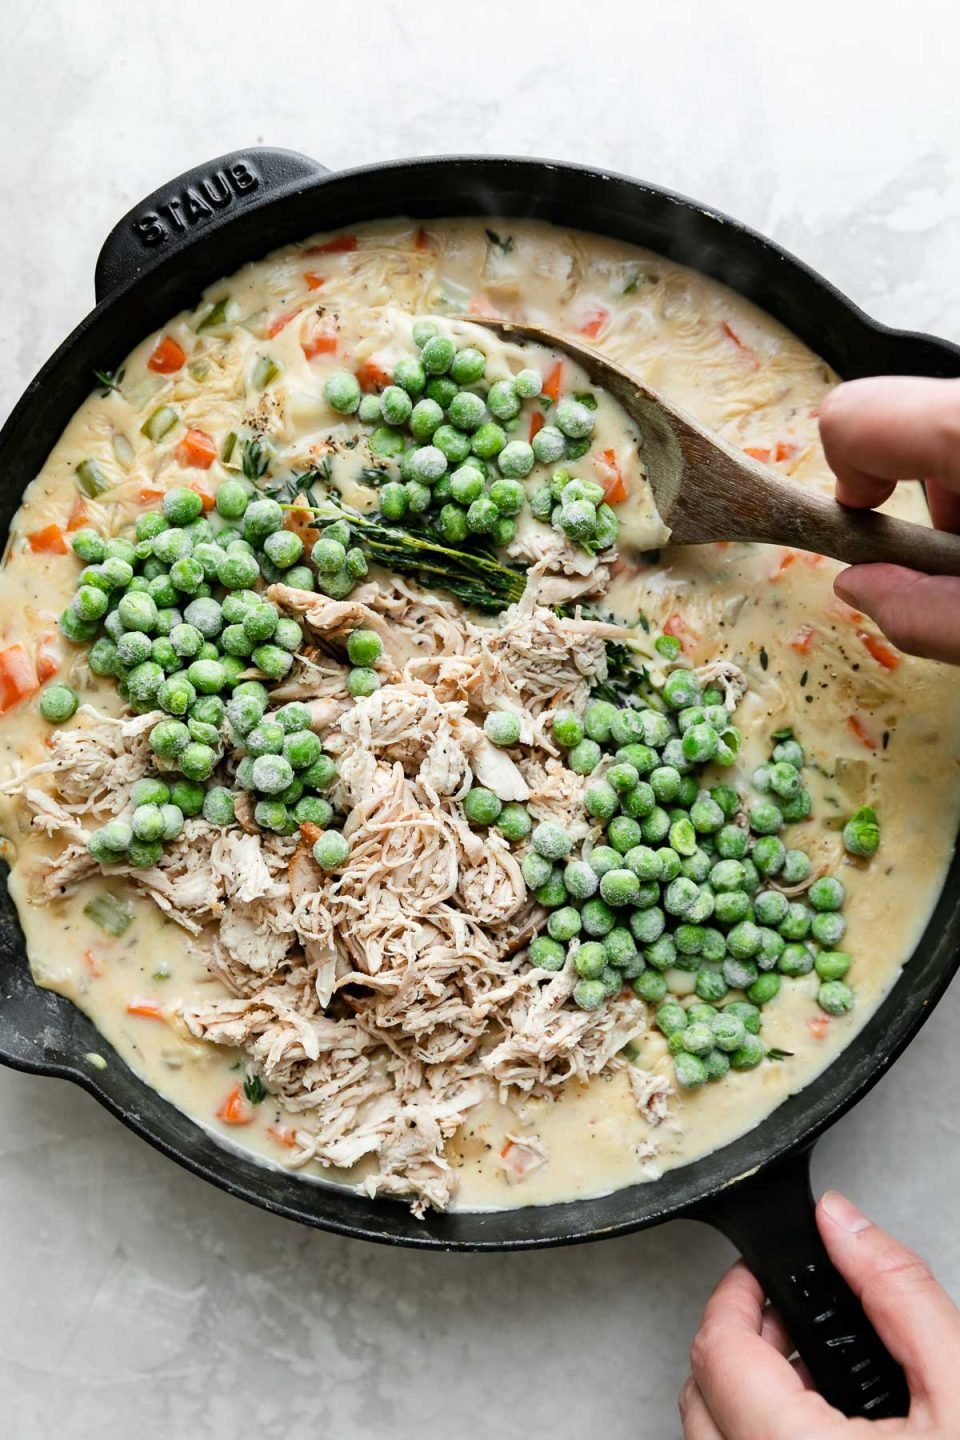 A black Staub cast iron skillet is filled with sauce to make Skillet Chicken Pot Pie. Frozen peas and shredded chicken has been added to the sauce to assemble the pot pie filling. The skillet sits atop a creamy white textured surface. A woman's hands hold the skillet handle while her other hand holds a wooden spoon using it to mix the pot pie filling.